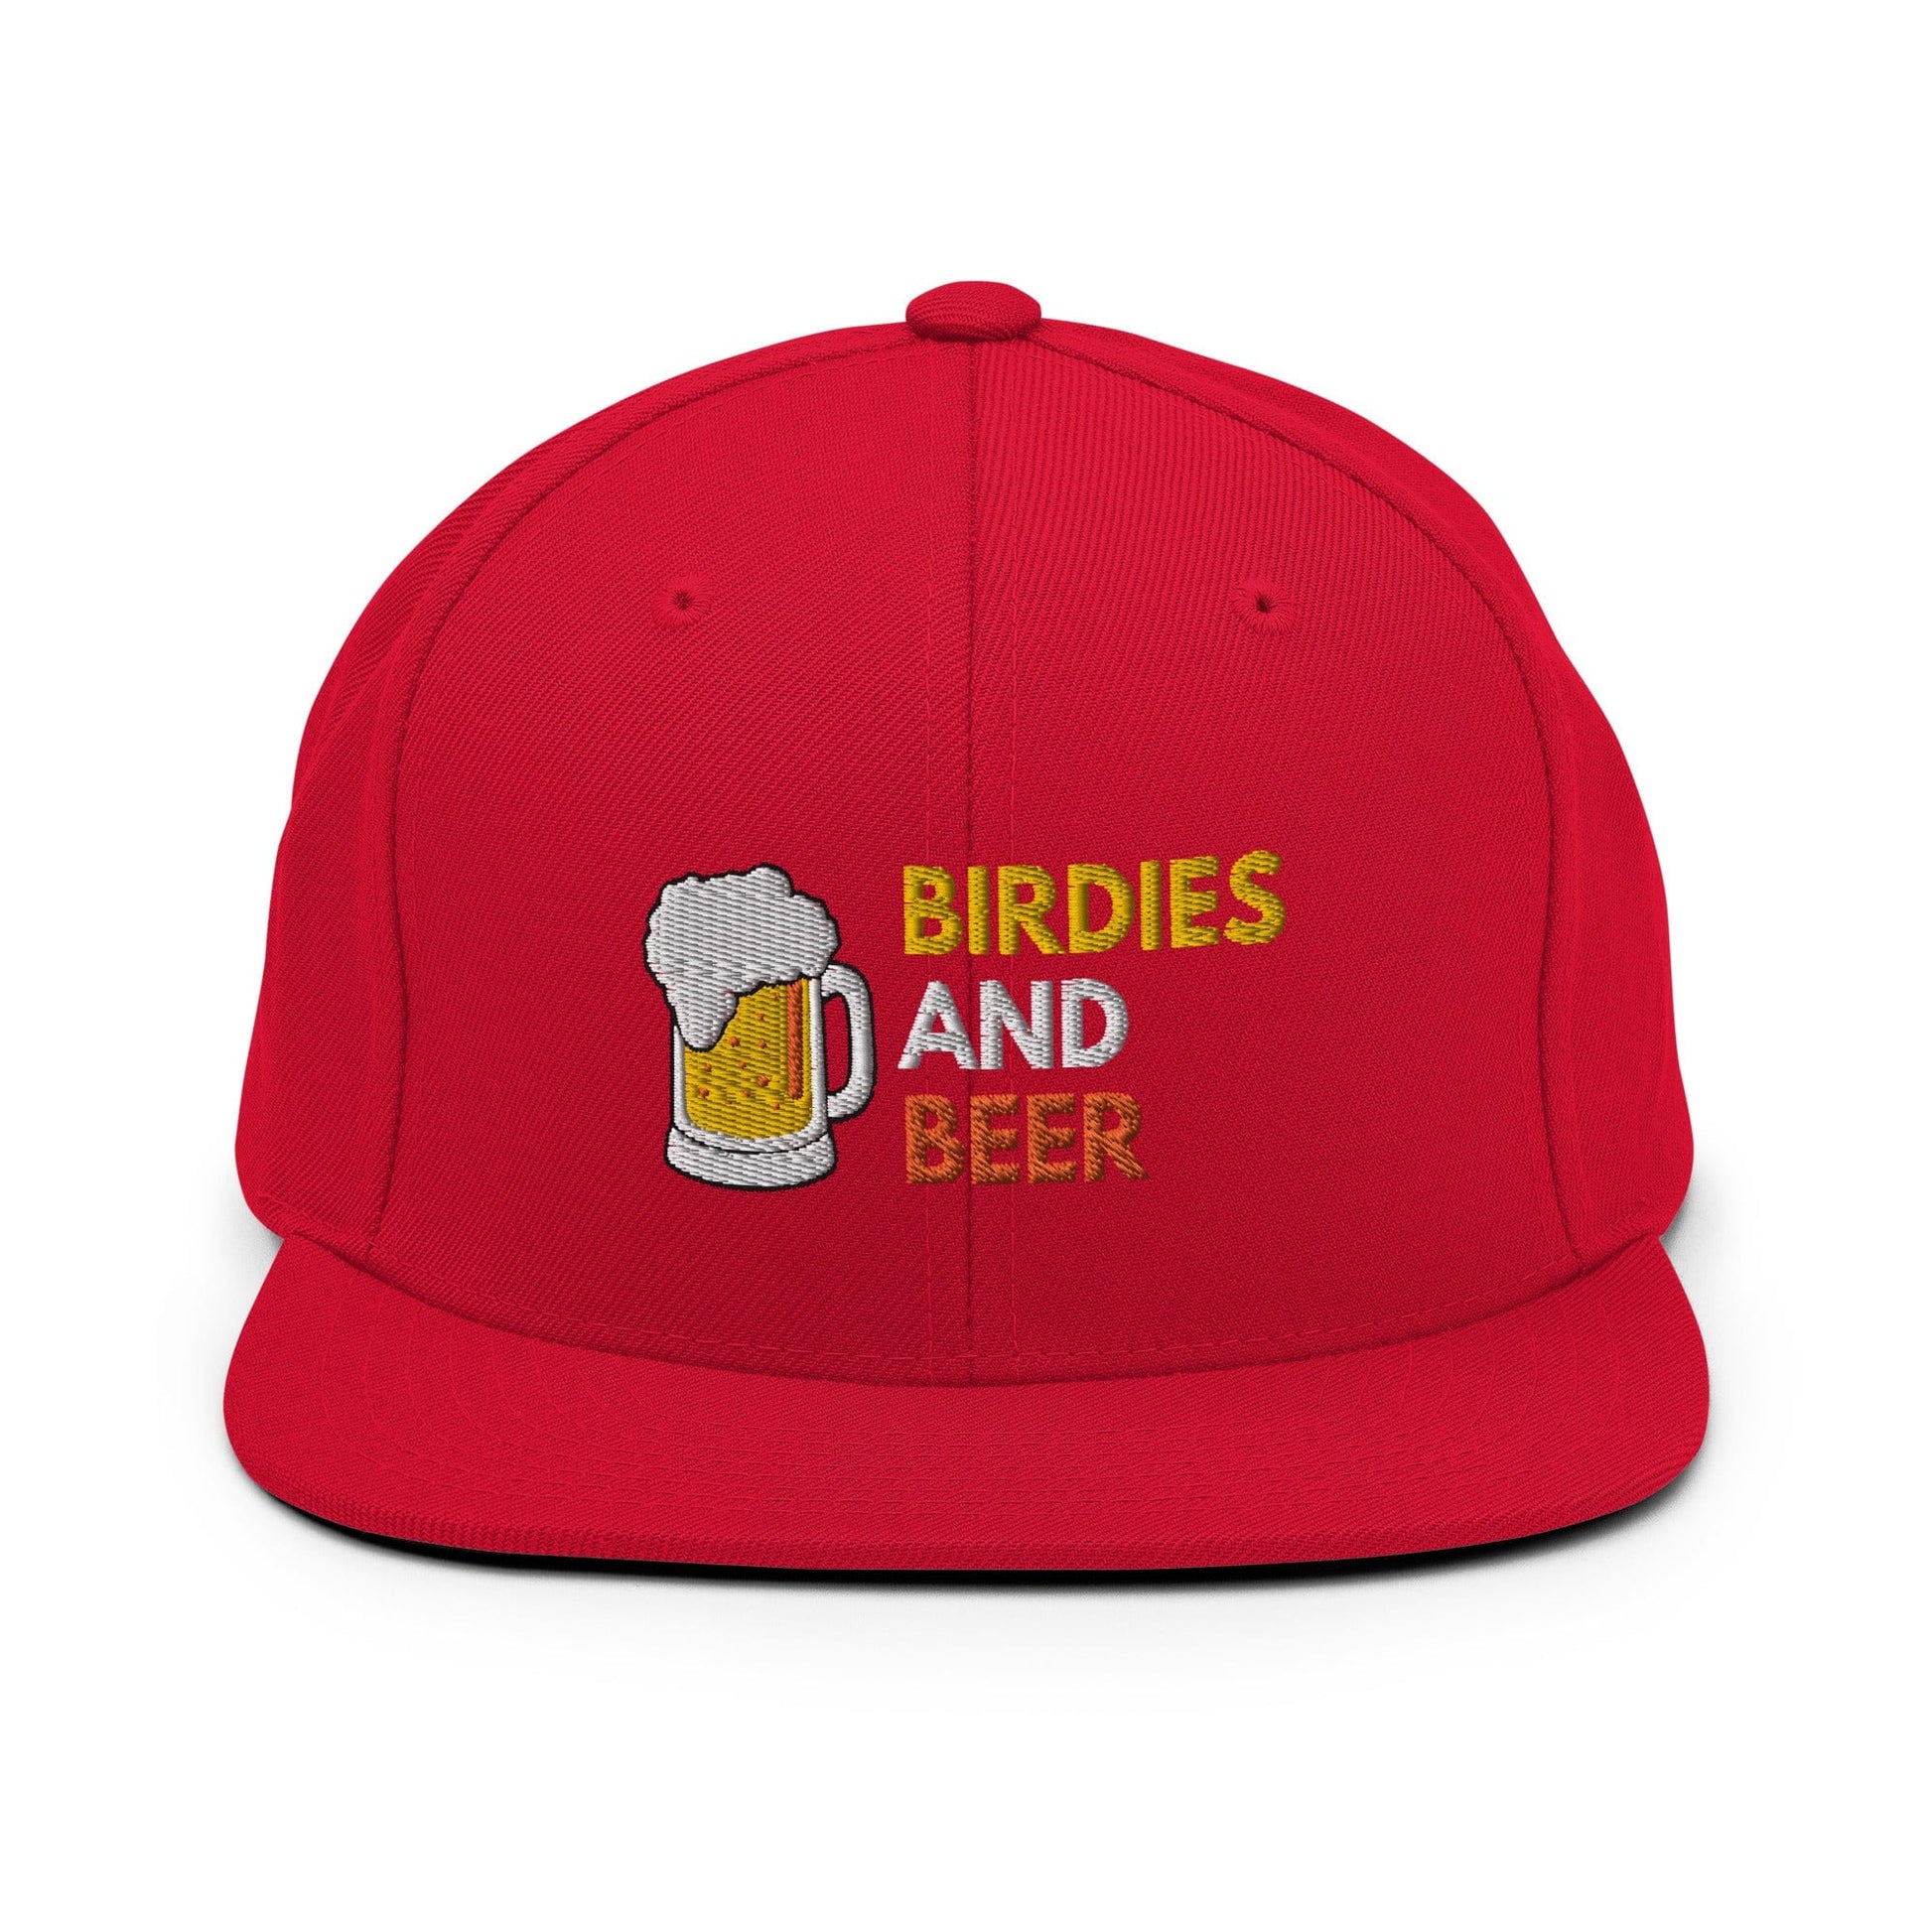 Funny Golfer Gifts  Snapback Hat Red Birdies and Beer Snapback Hat